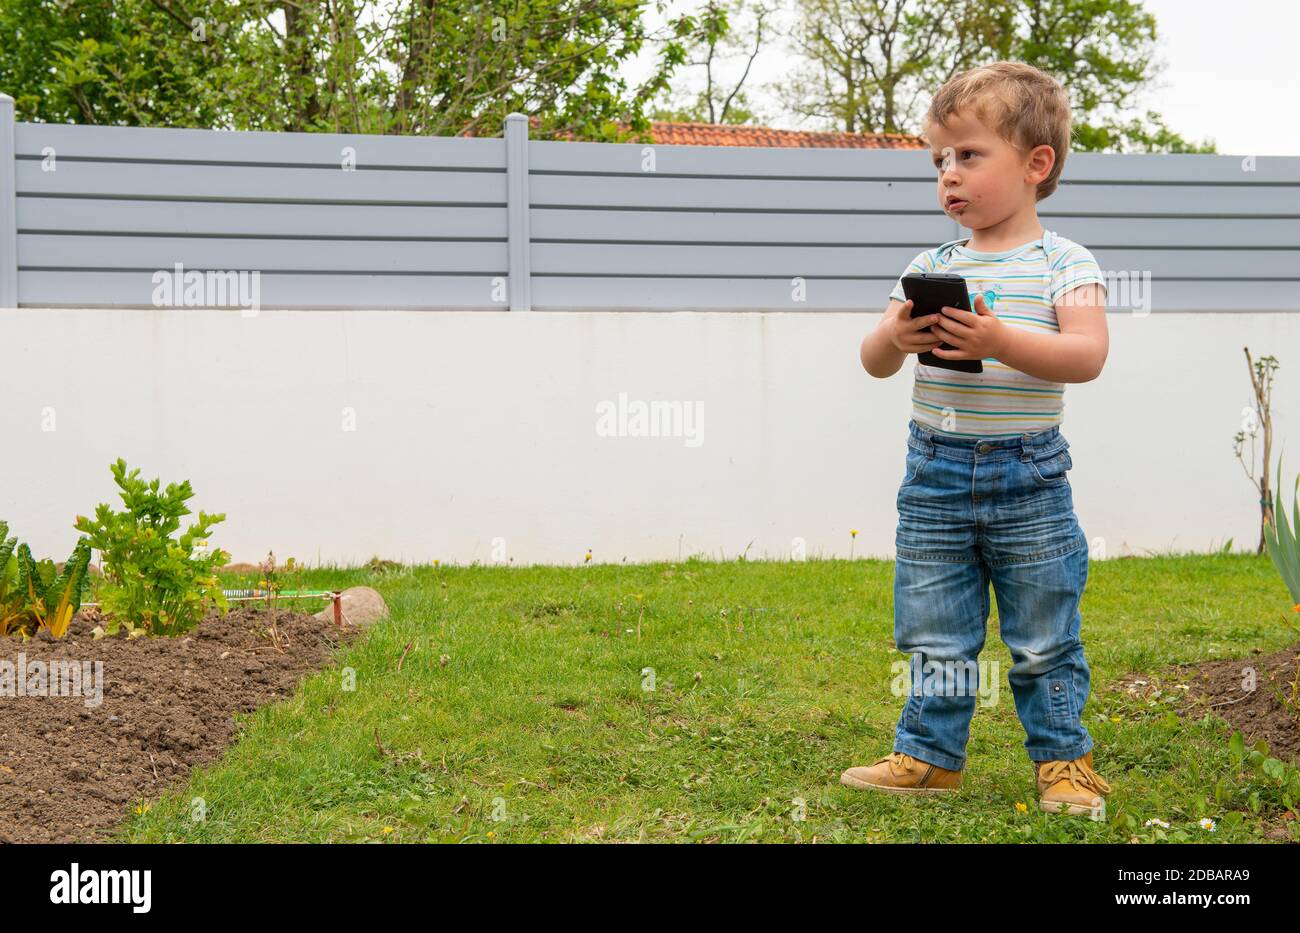 a kid use cellphone in the park Stock Photo